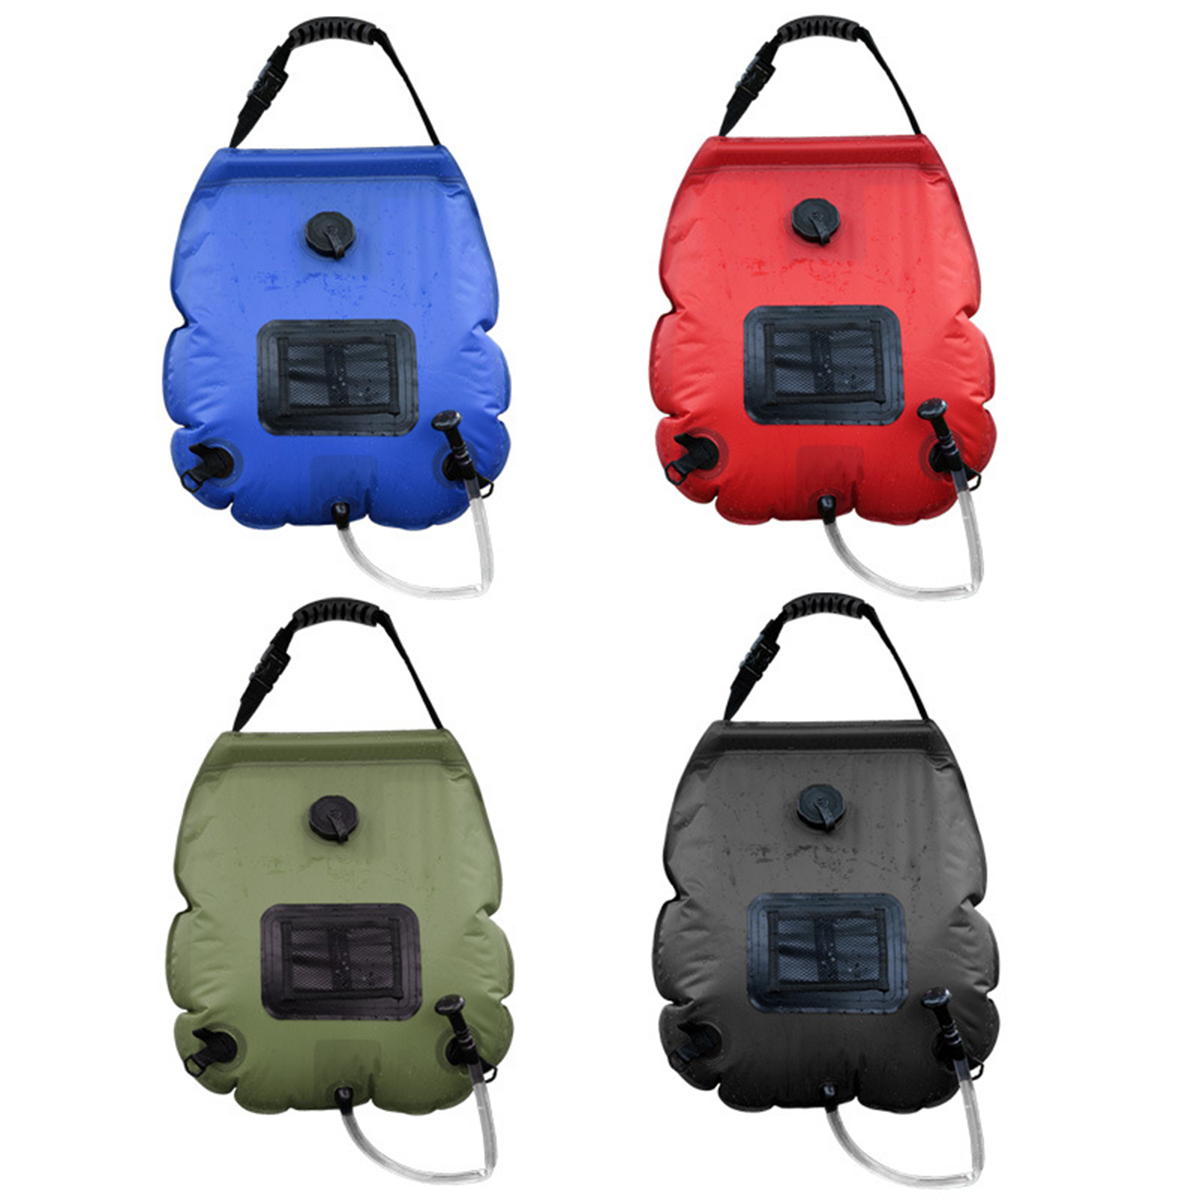 20L-Portable-Solar-Heated-Shower-Water-Bathing-Bag-Outdoor-Camping-Hiking-Water-Bag-With-Temperature-1790788-12